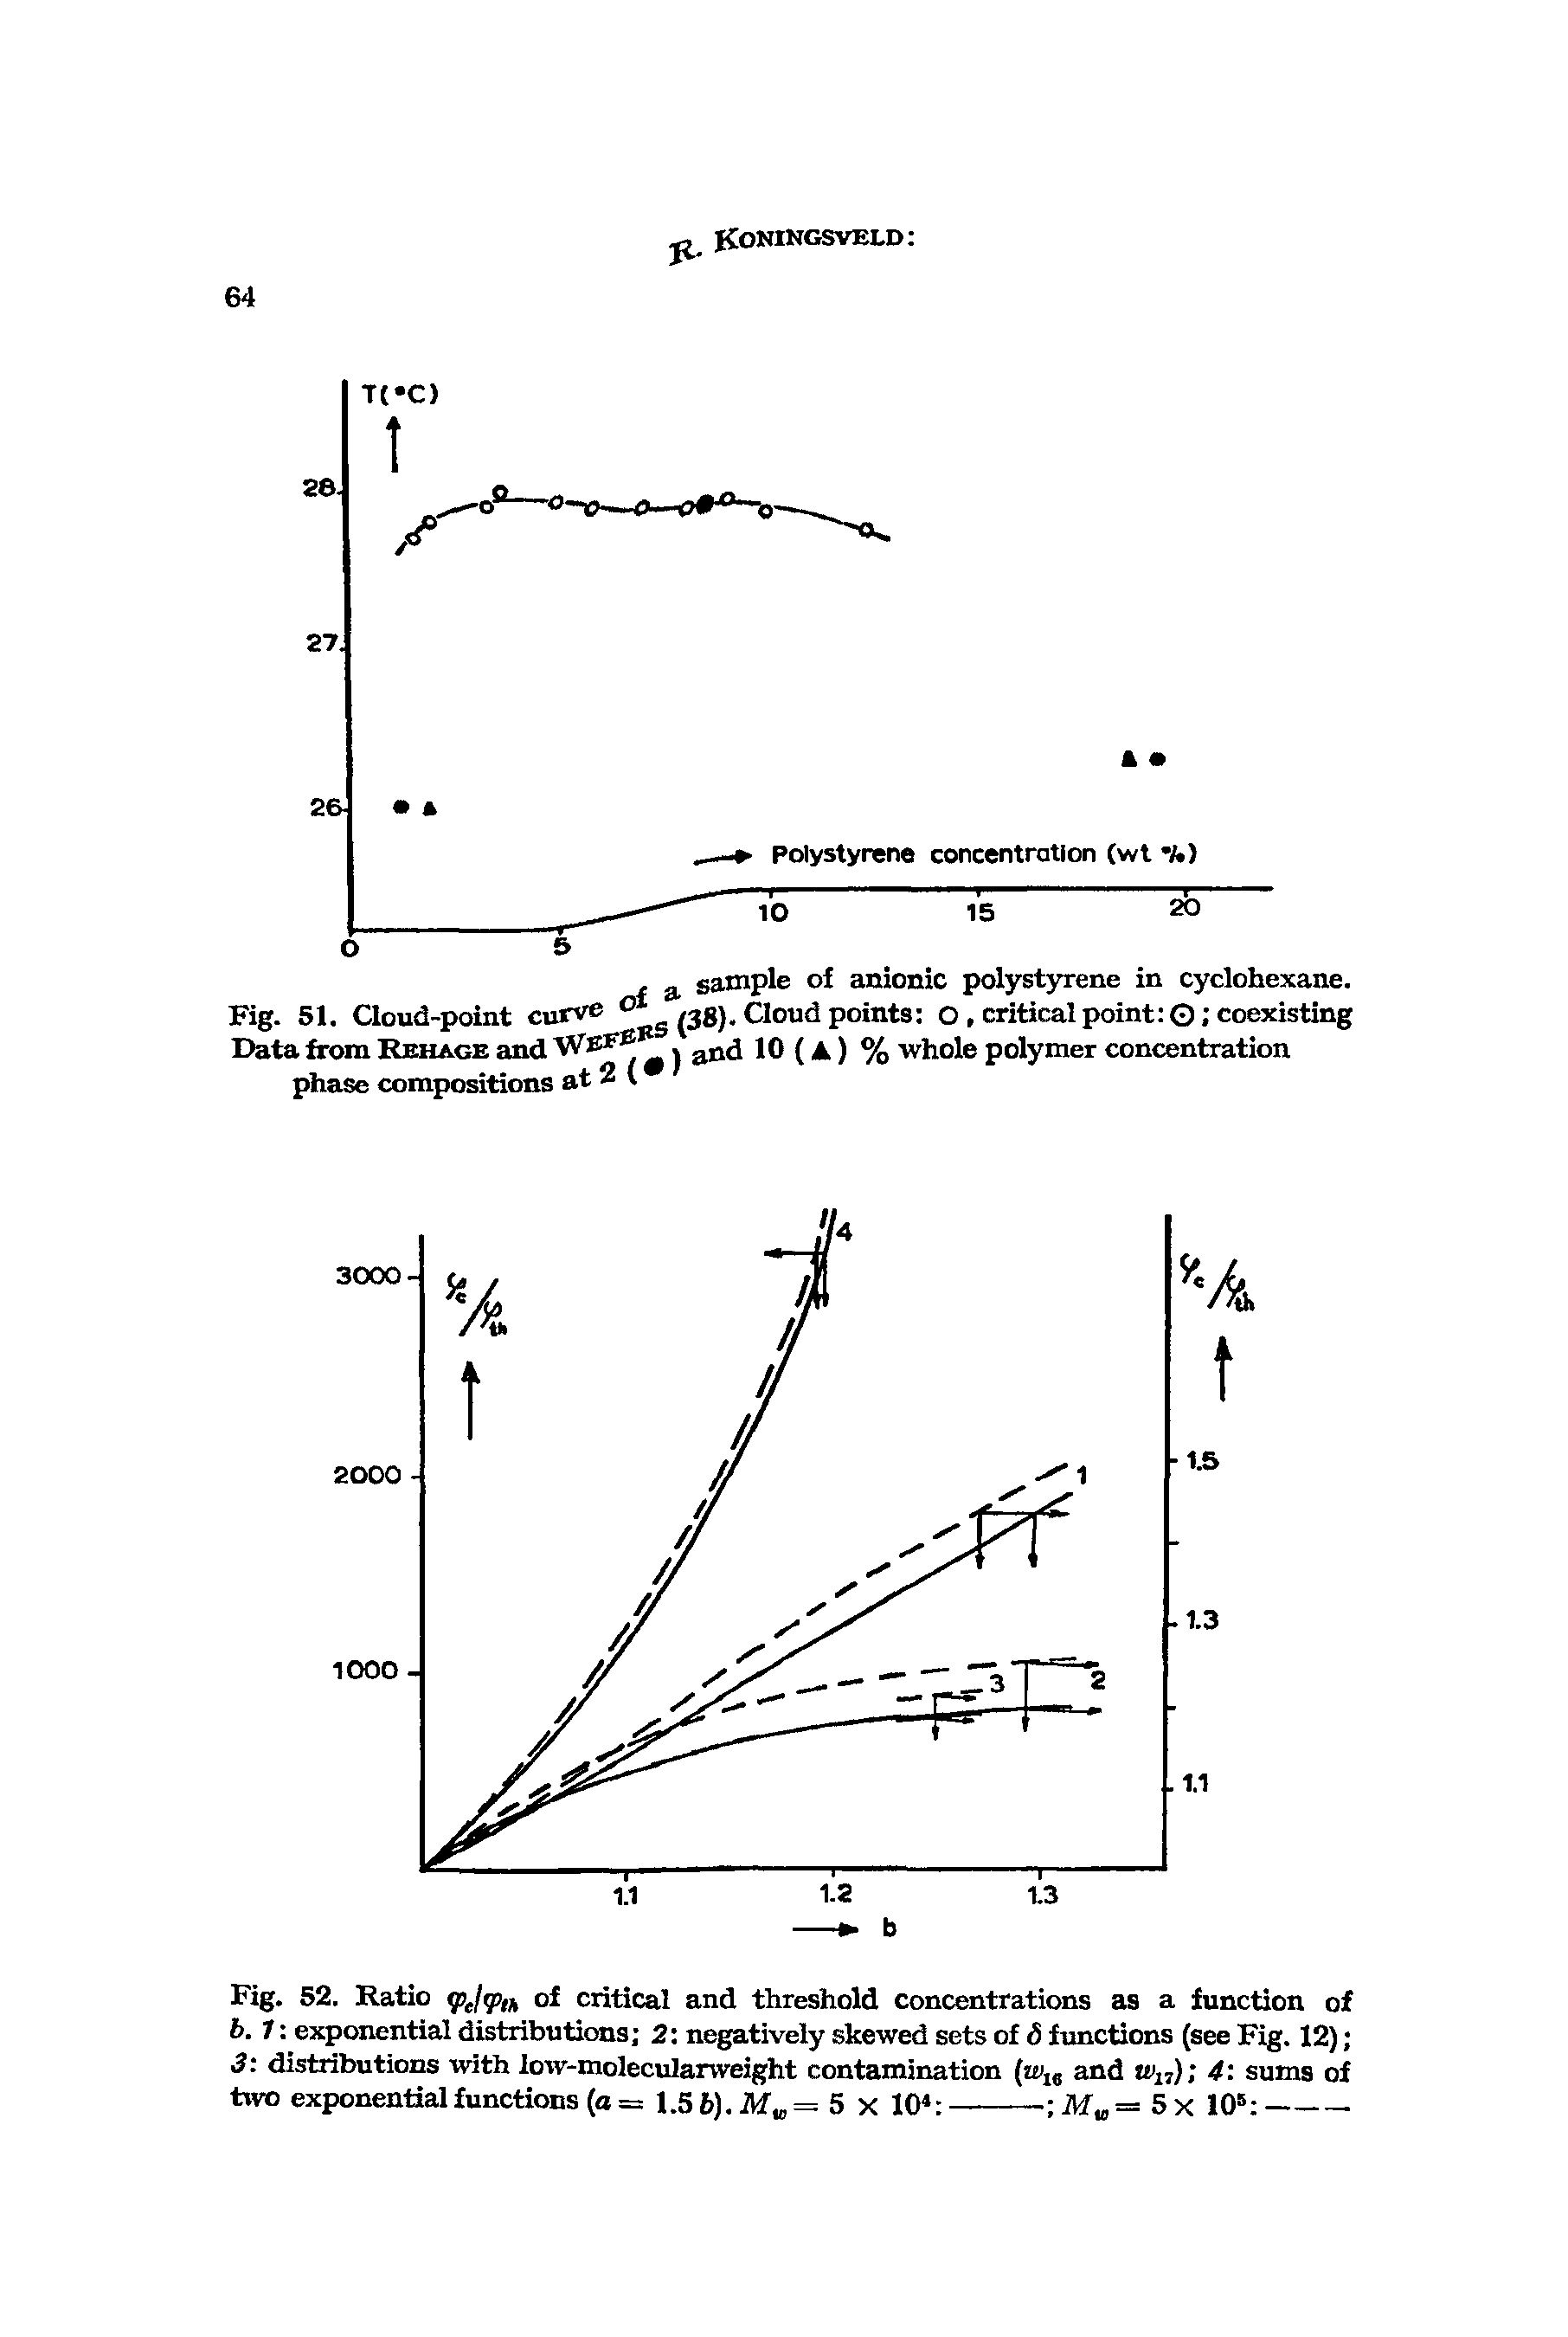 Fig. 51, Cloud-point curve o a sample of anionic polystyrene in cyclohexane. Data from Rbhage and Wefebs (38). Cloud points O, critical point O coexisting phase compomtions at 2 ( ) and 10(a) % whole polymer concentration...